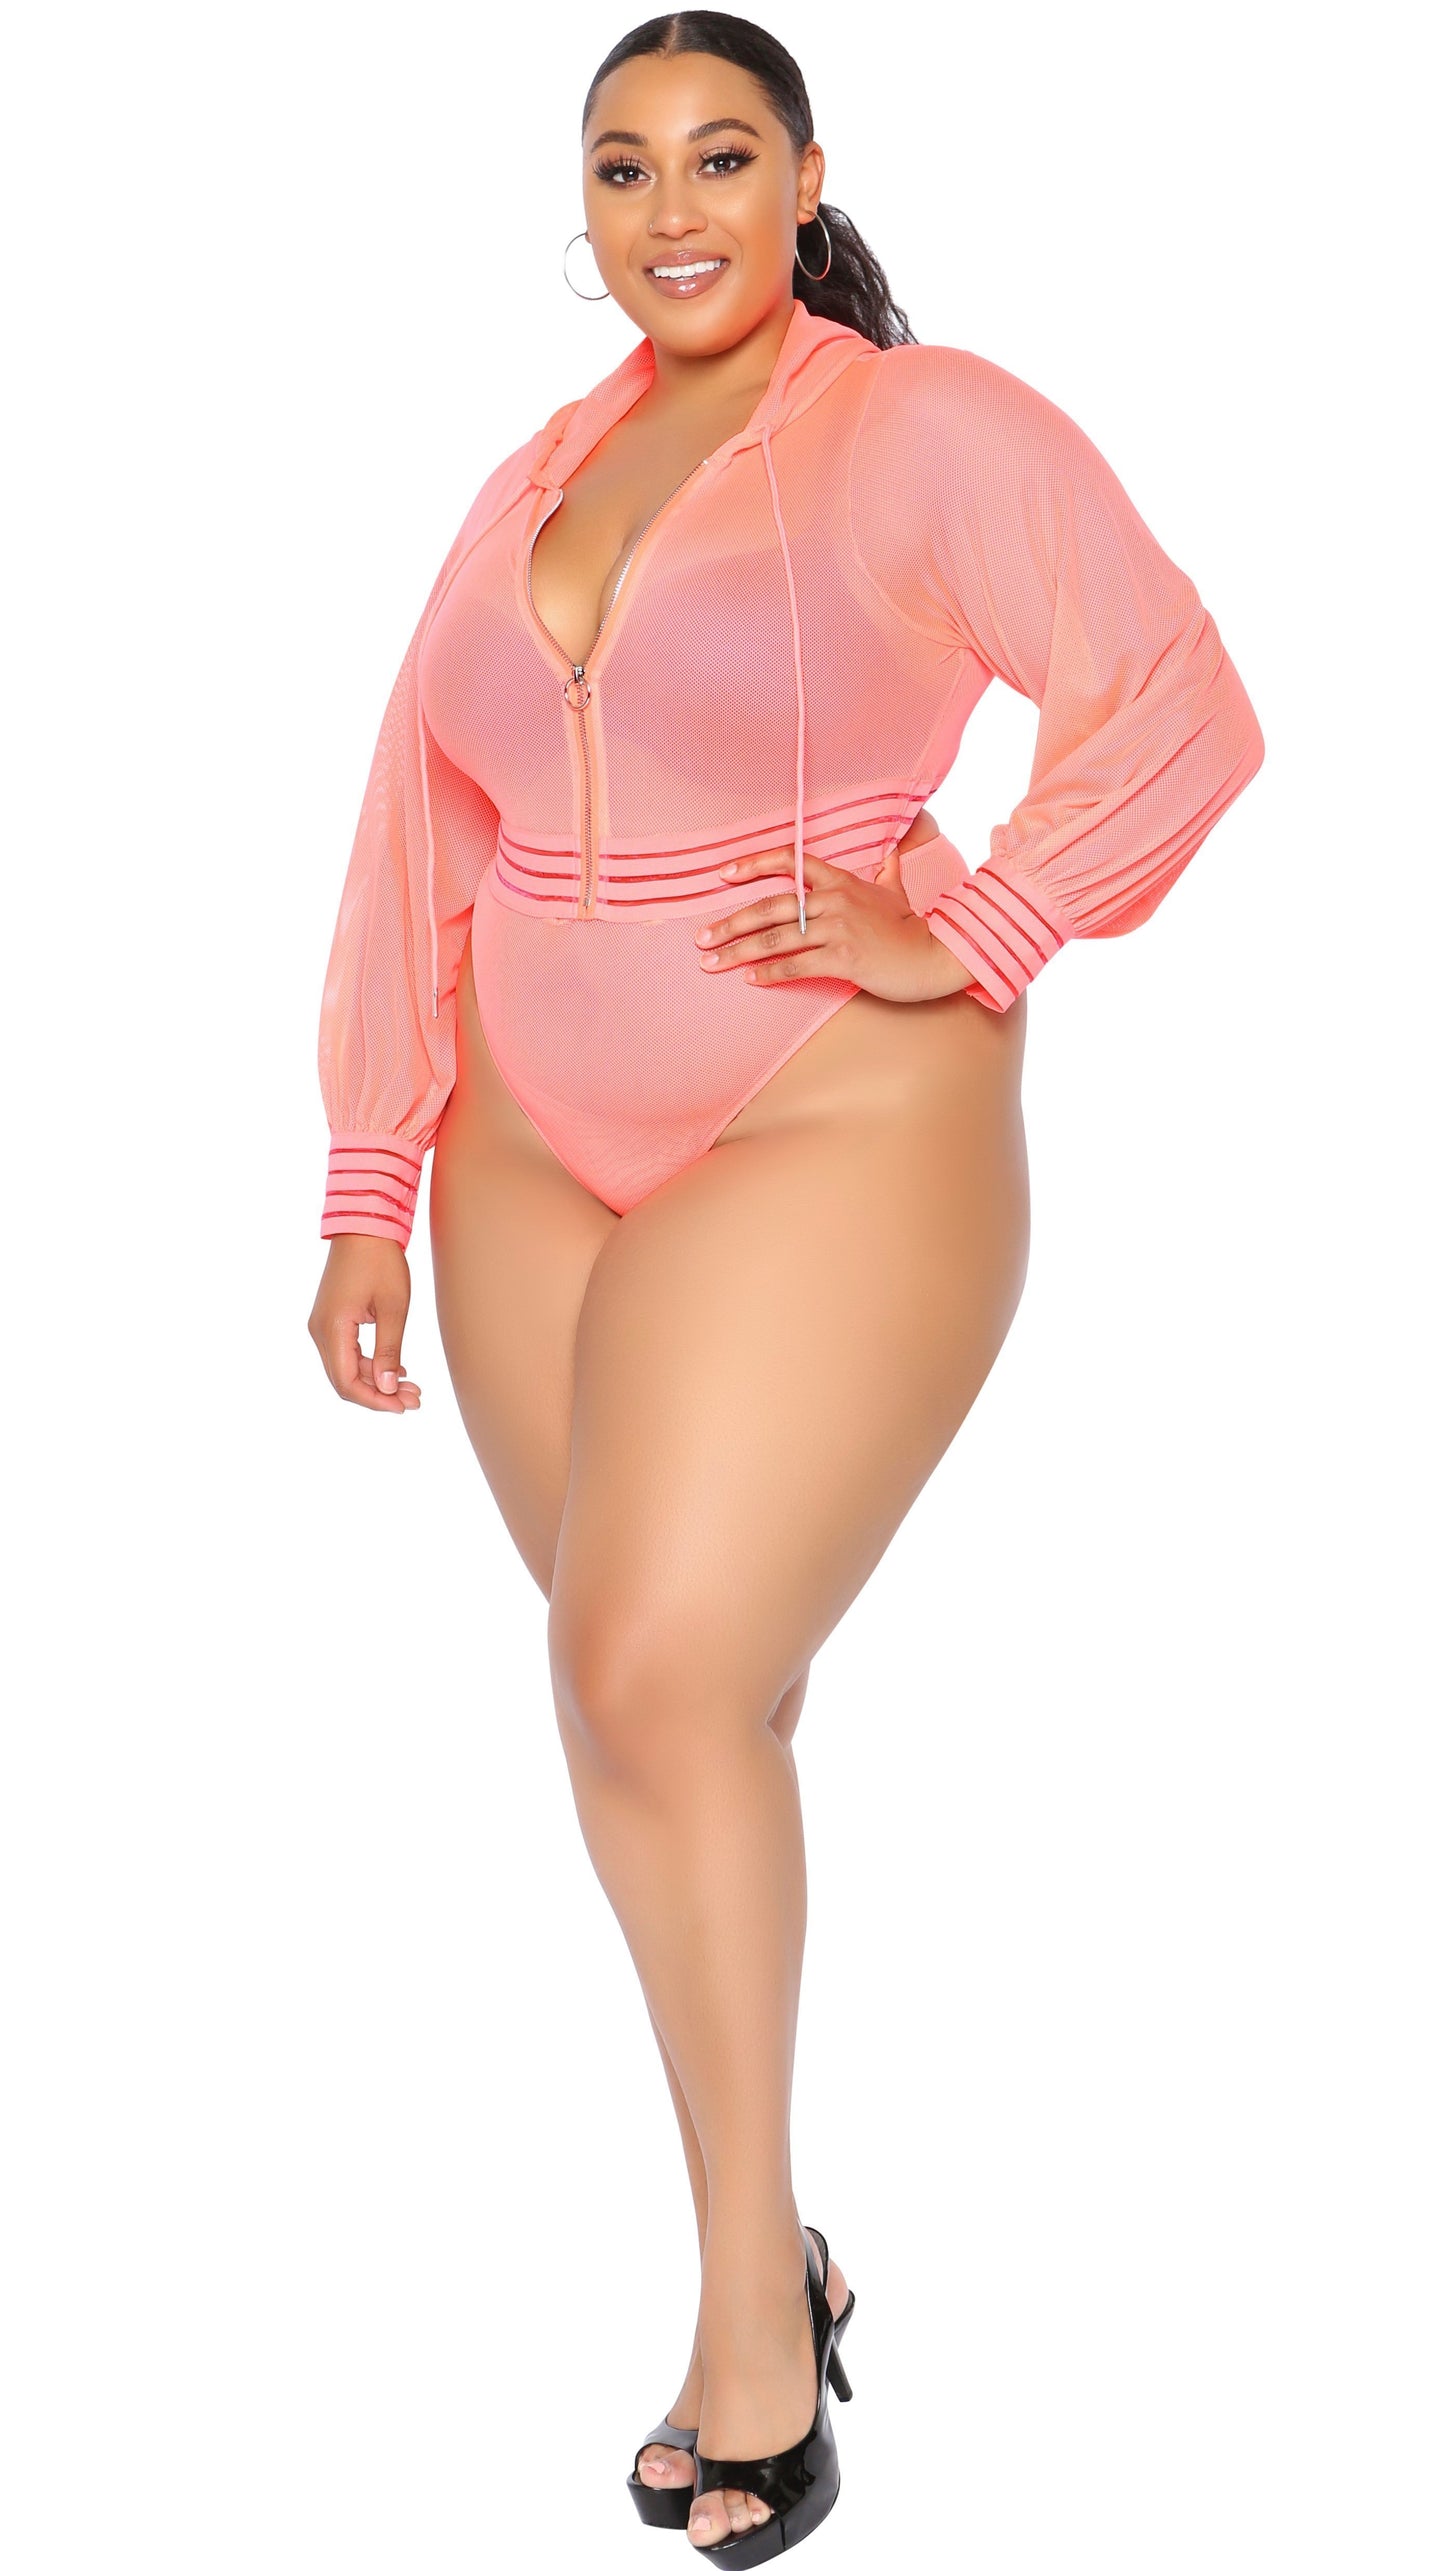 Too Much Sauce Hooded Bodysuit/Swimwear (Neon Pink)-Bodysuits-Boughie-Boughie